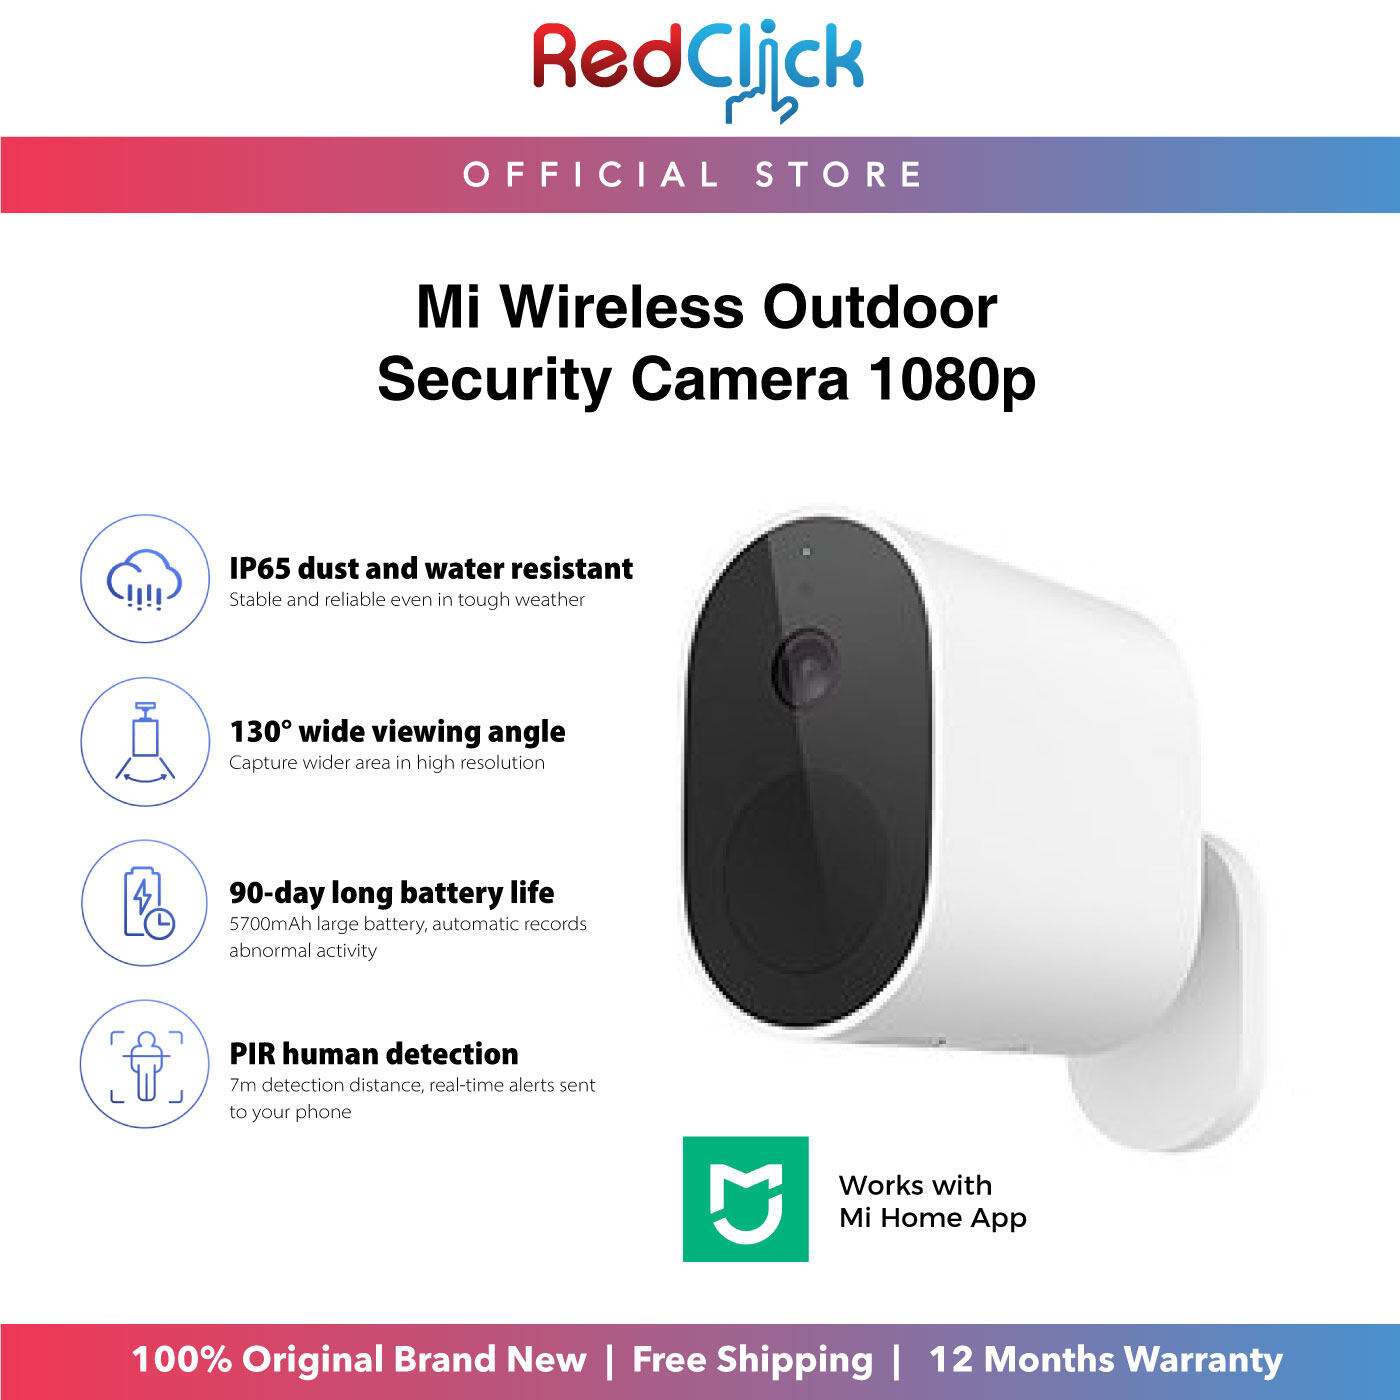 Xiaomi Mi Wireless Outdoor Security Camera CCTV 1080p/MWC14 130° Wide Viewing Angle Long Battery Life Human Detection